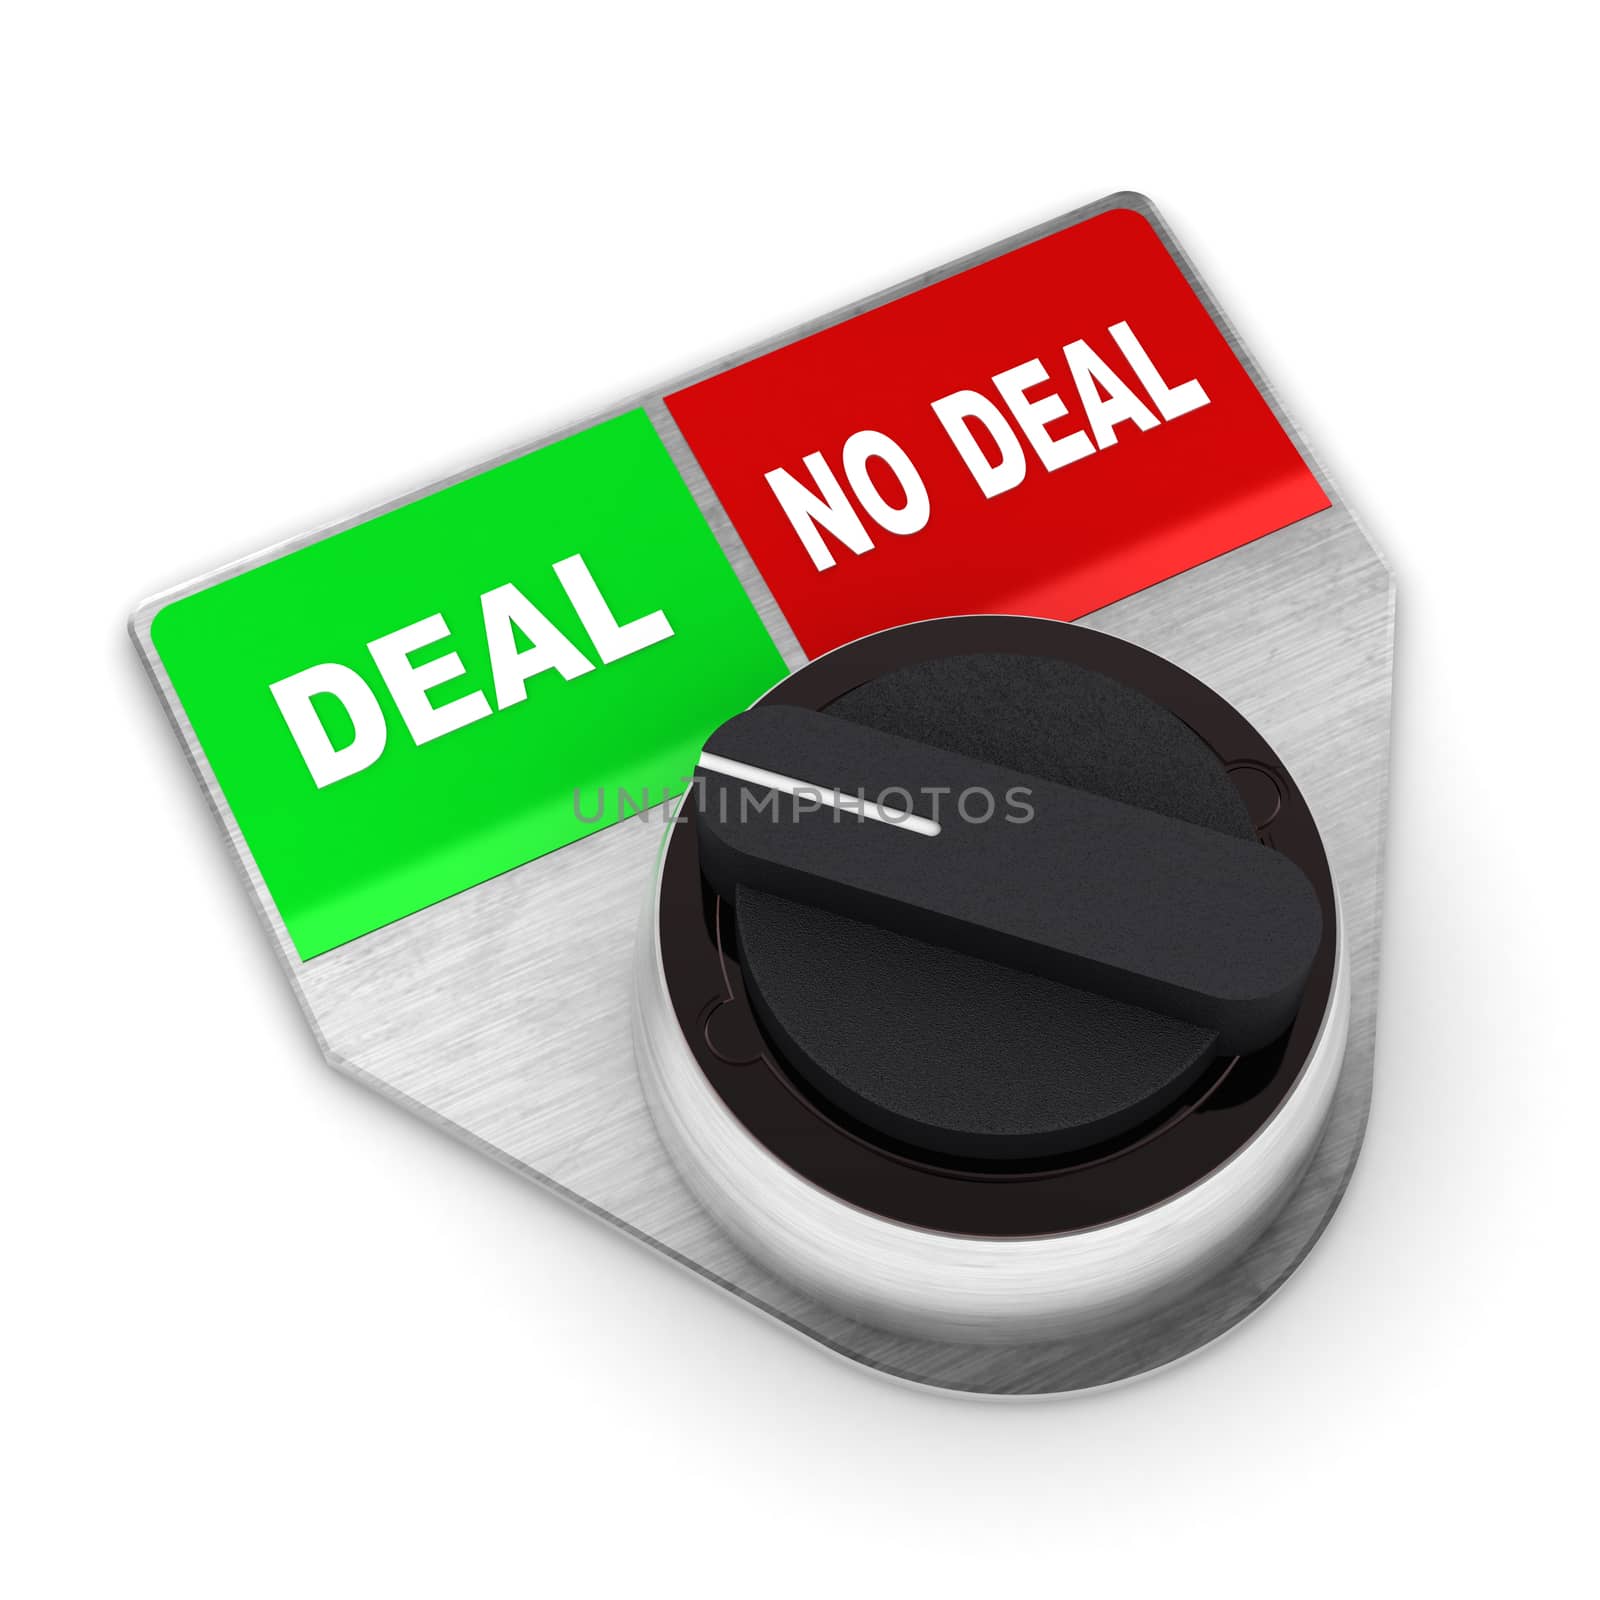 A Colourful 3d Rendered Deal Vs No Deal Concept Switch Illustration